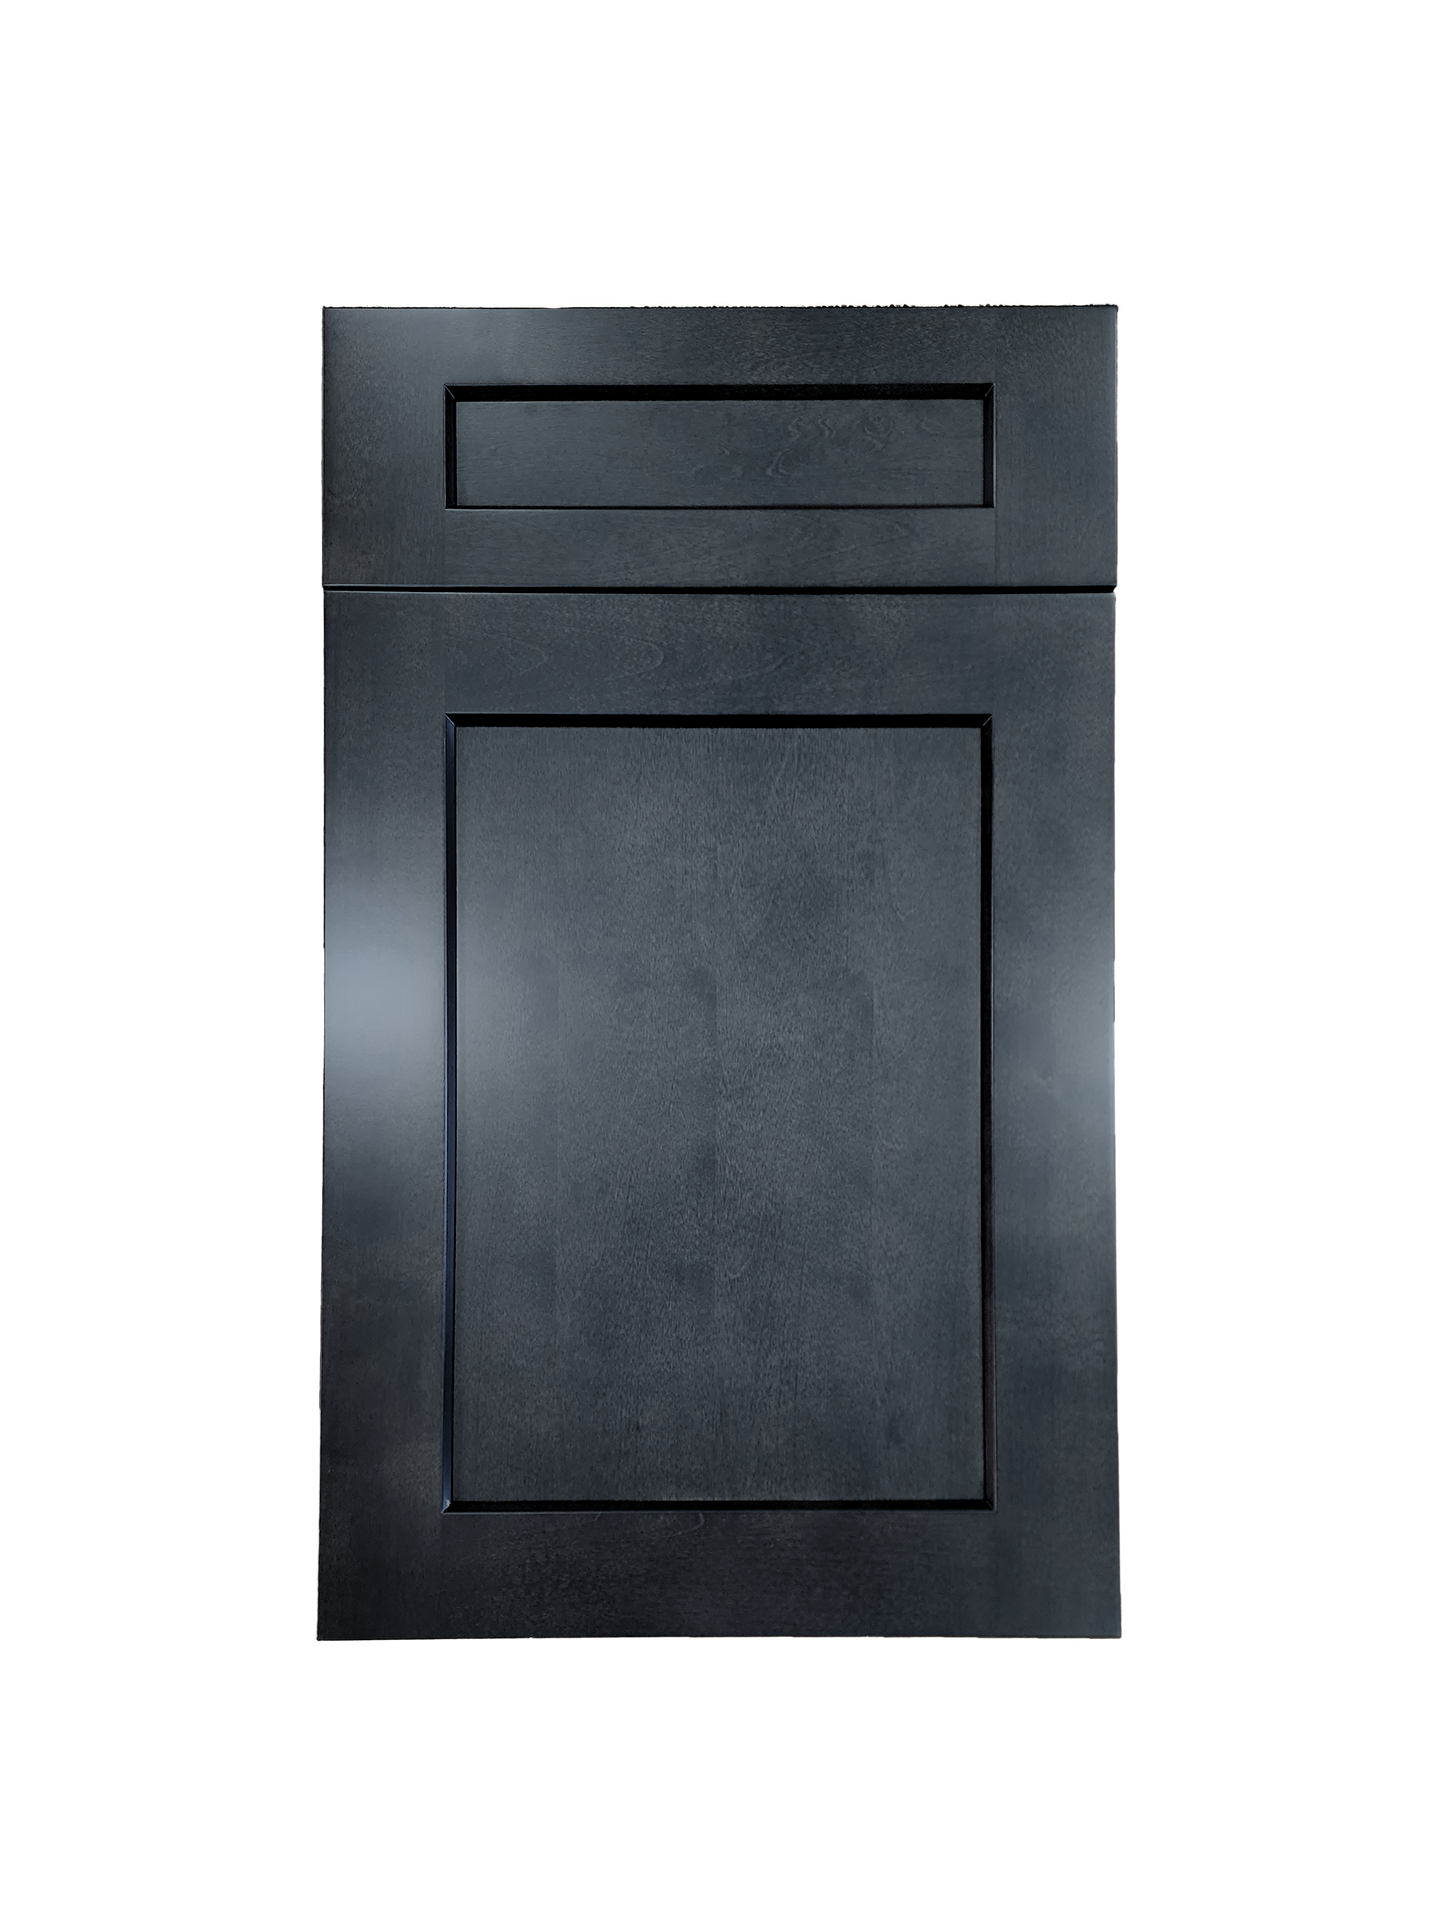 Stormy Grey Wall Microwave Cabinet 24 inches wide 12 inches deep 30 inches tall with Stormy Grey box and Stormy Grey doors